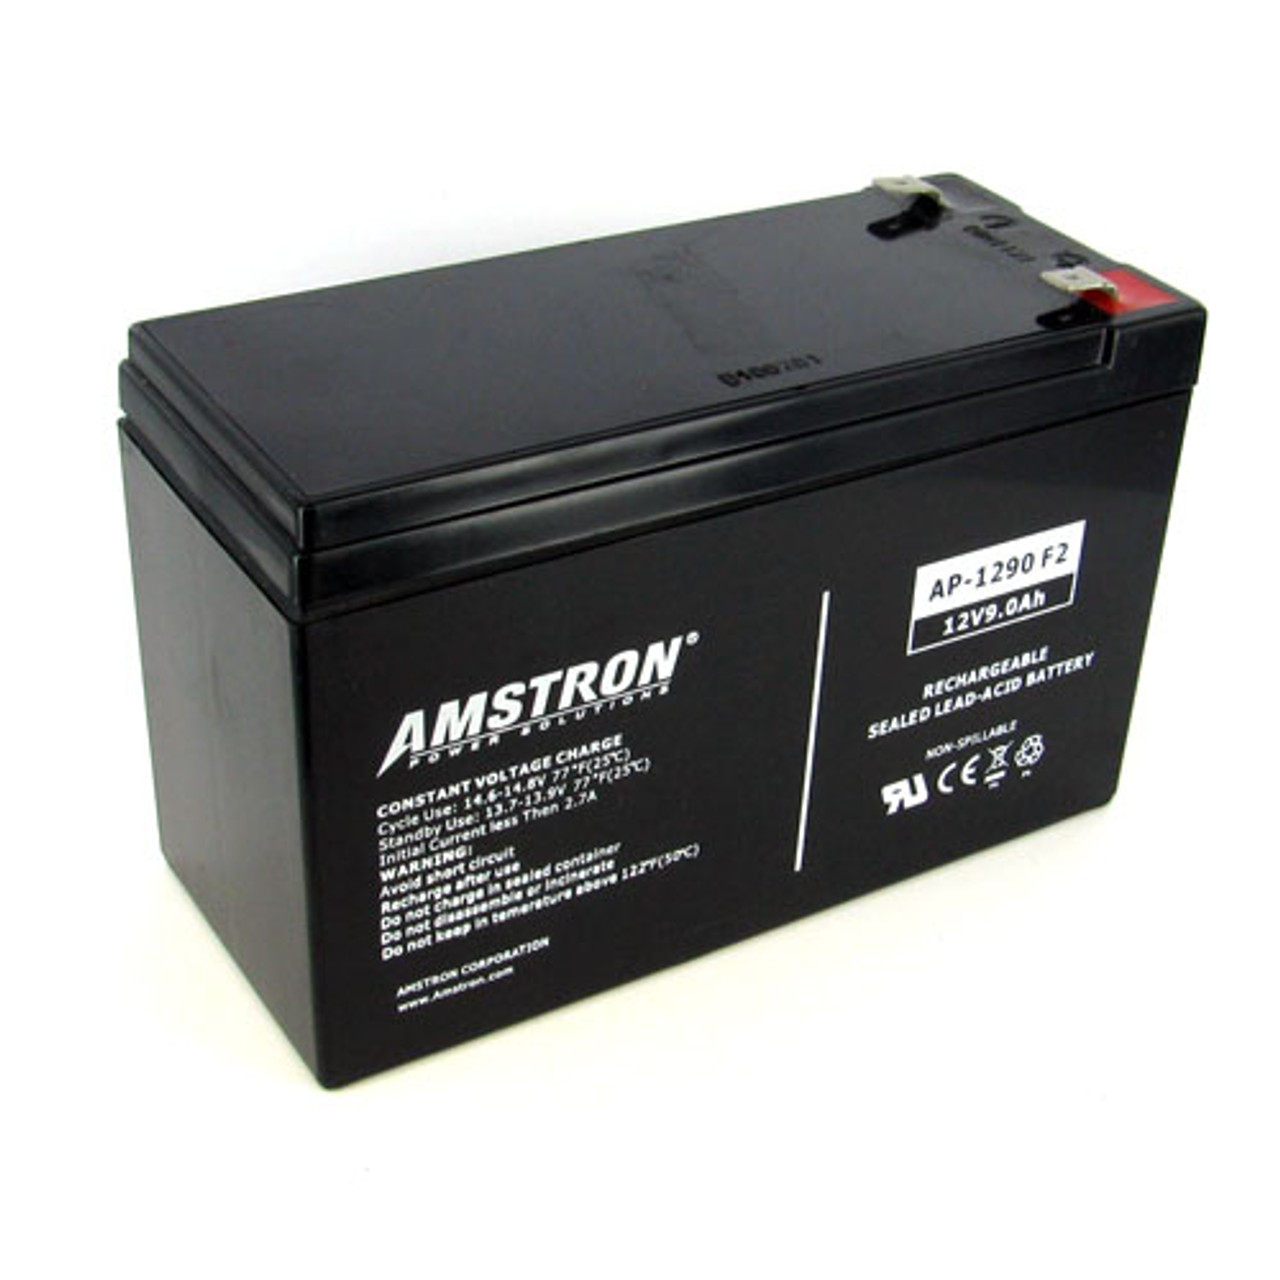 12V 12Ah battery, Sealed Lead Acid battery (AGM), battery-direct  SBY-AGM-12-12, 151x98x95 mm (LxWxH), Terminal T2 Faston 250 (6,3 mm)